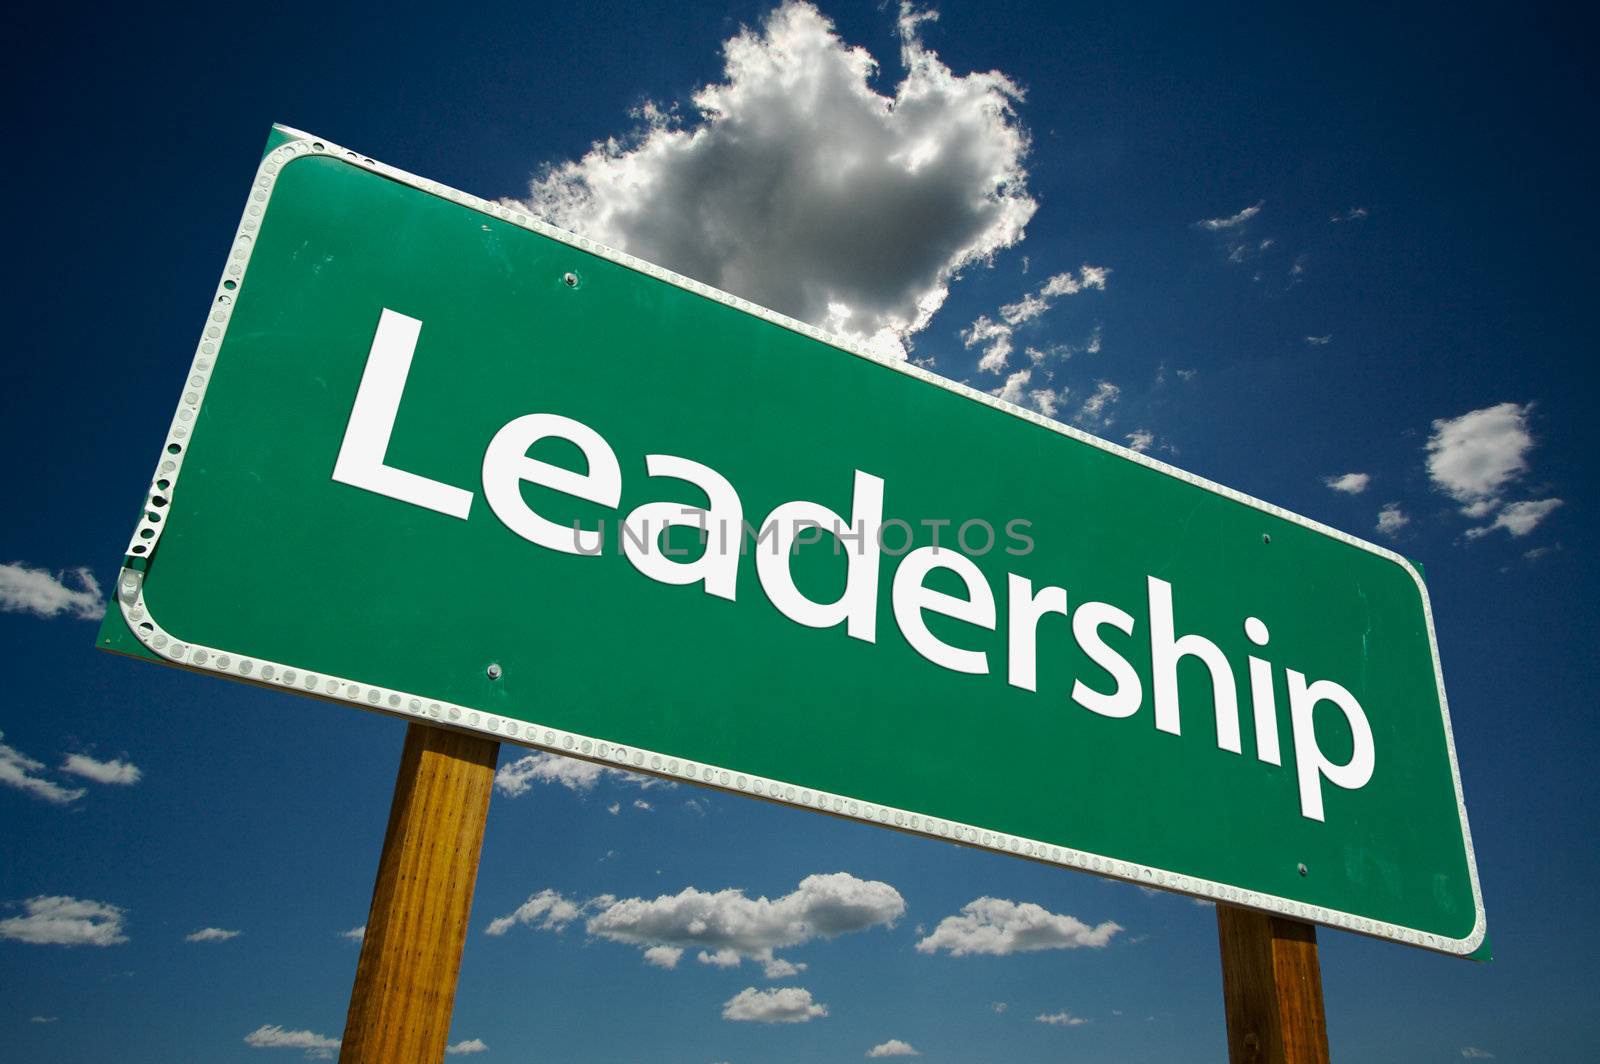 Leadership Road Sign by Feverpitched